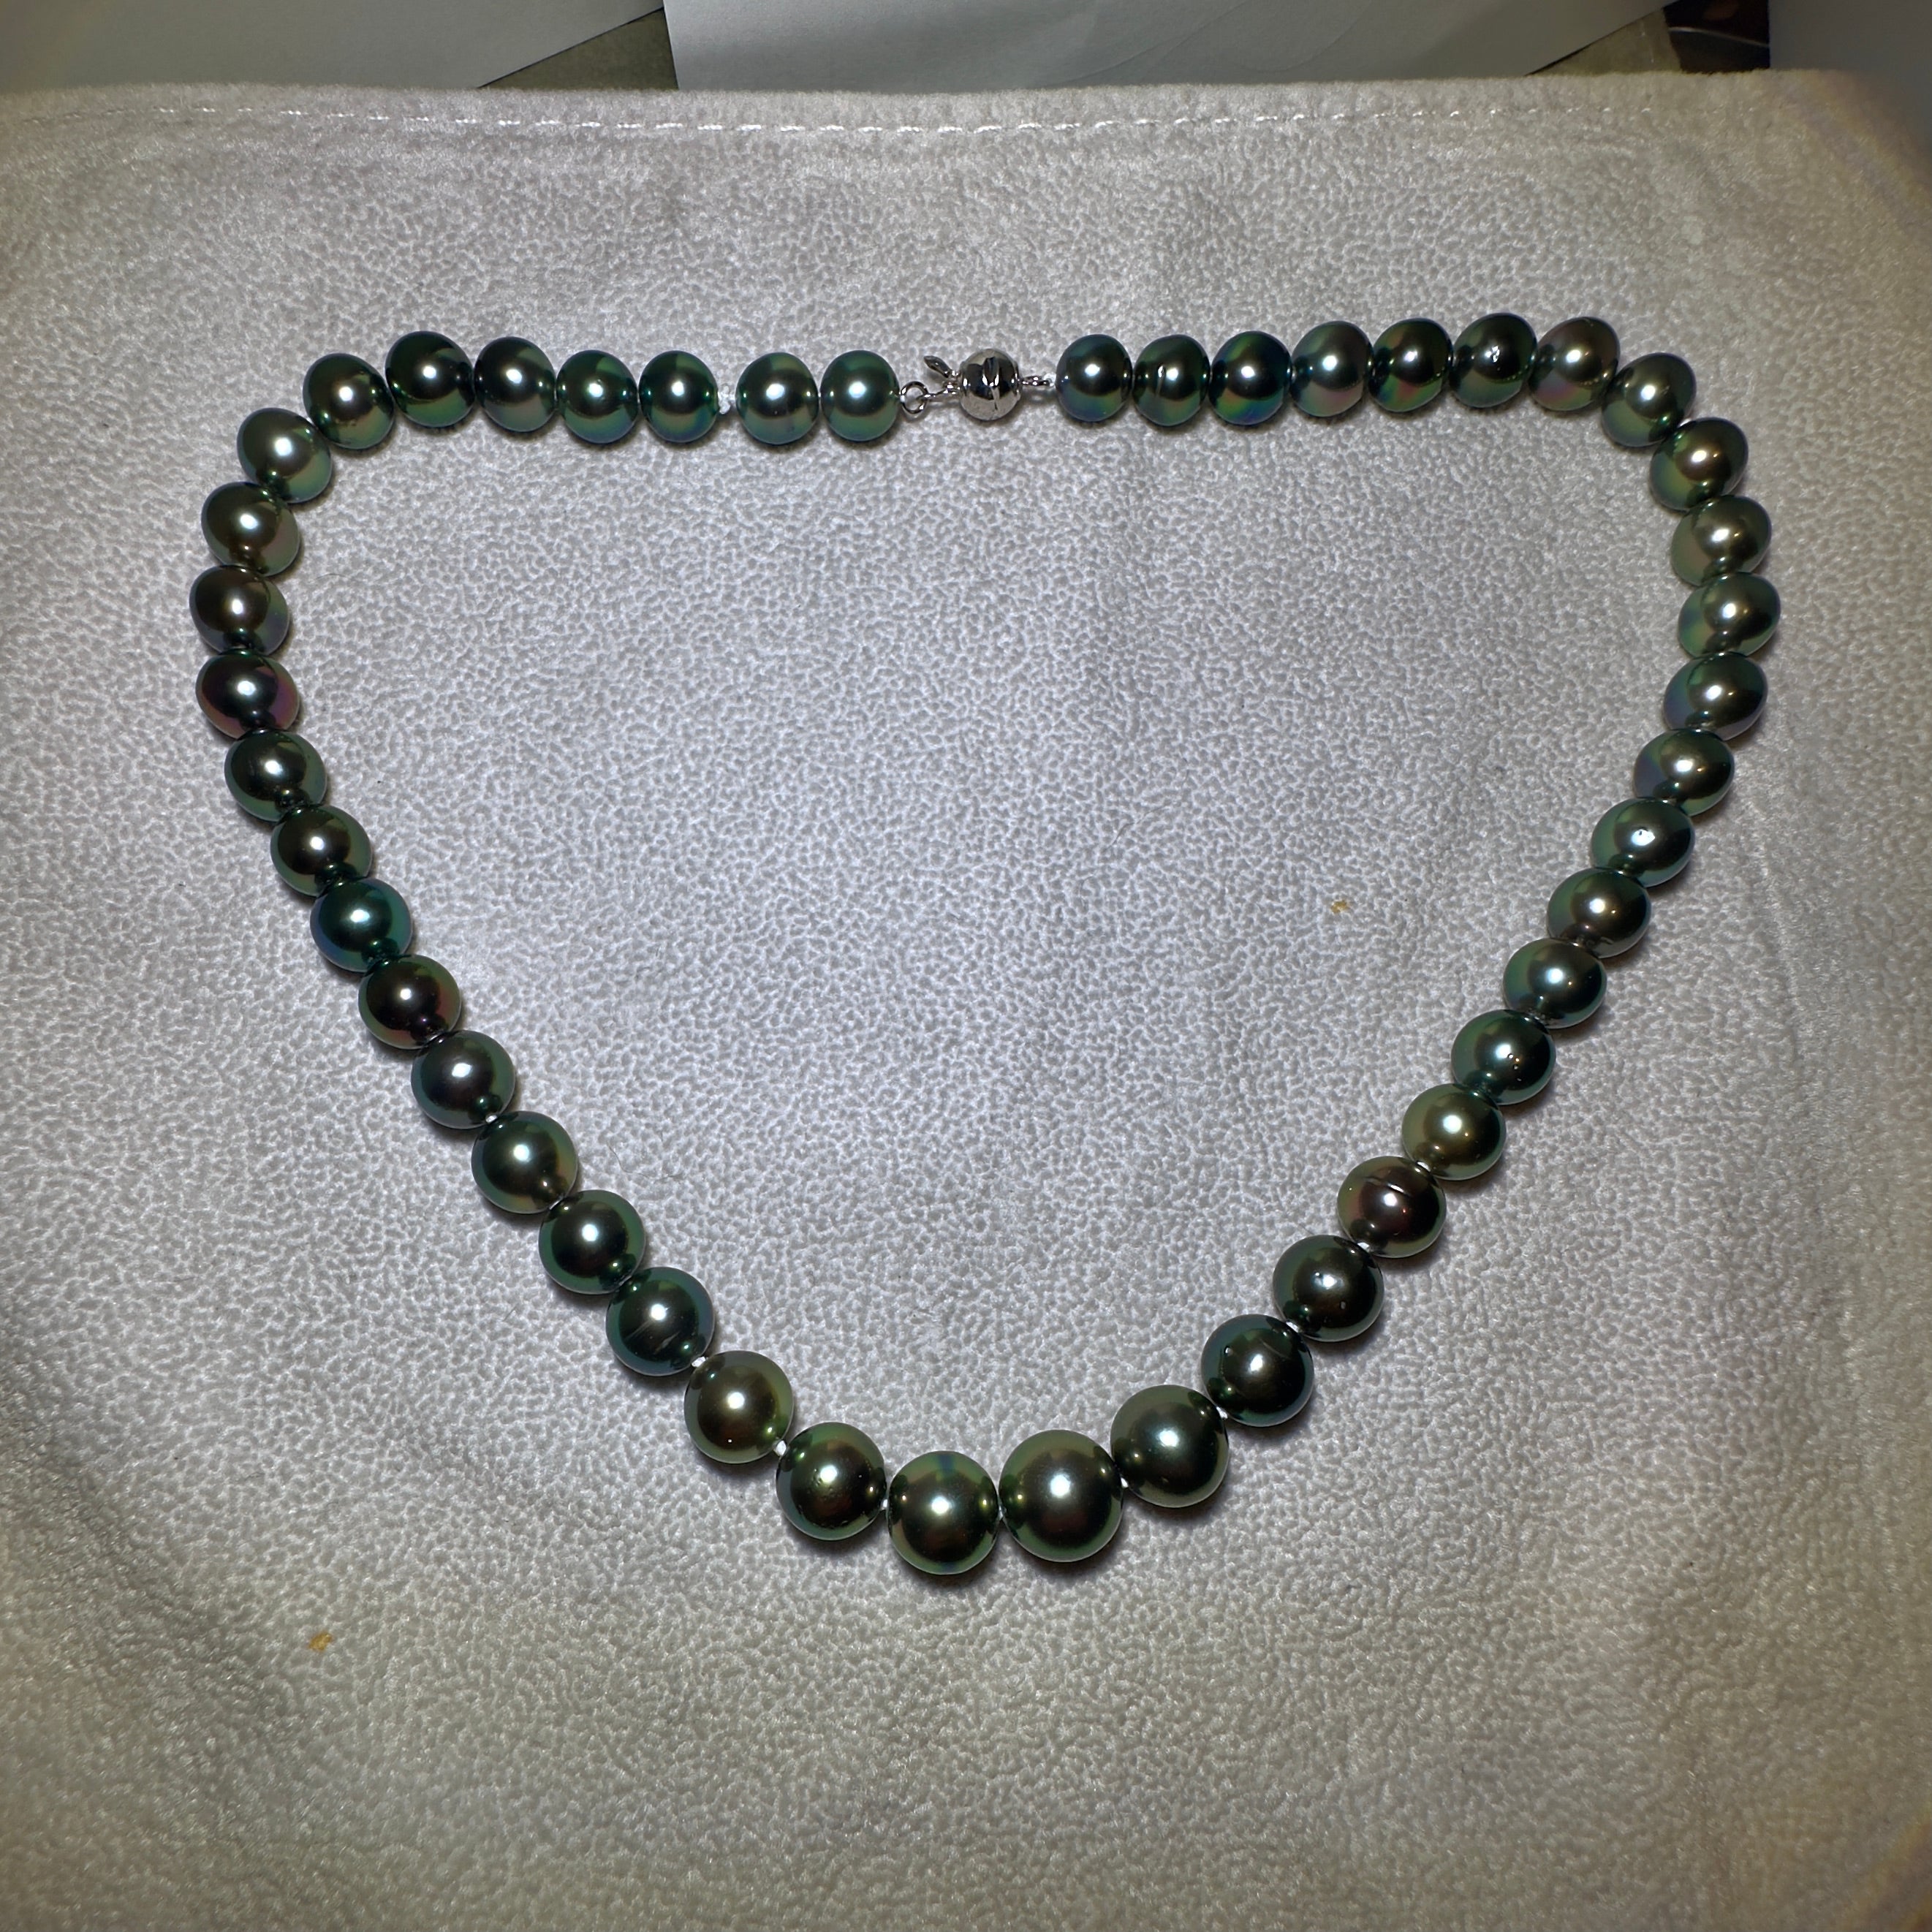 A Strand of black Colour Green tone Tahitian pearl necklace with 18K Gold Clasp. Green tone is very sought after in Tahitian pearls and therefore more valuable. 

A 10.4 mm to 13.5 mm black Colour Green Tone Tahitian Pearl Necklace. It is a very